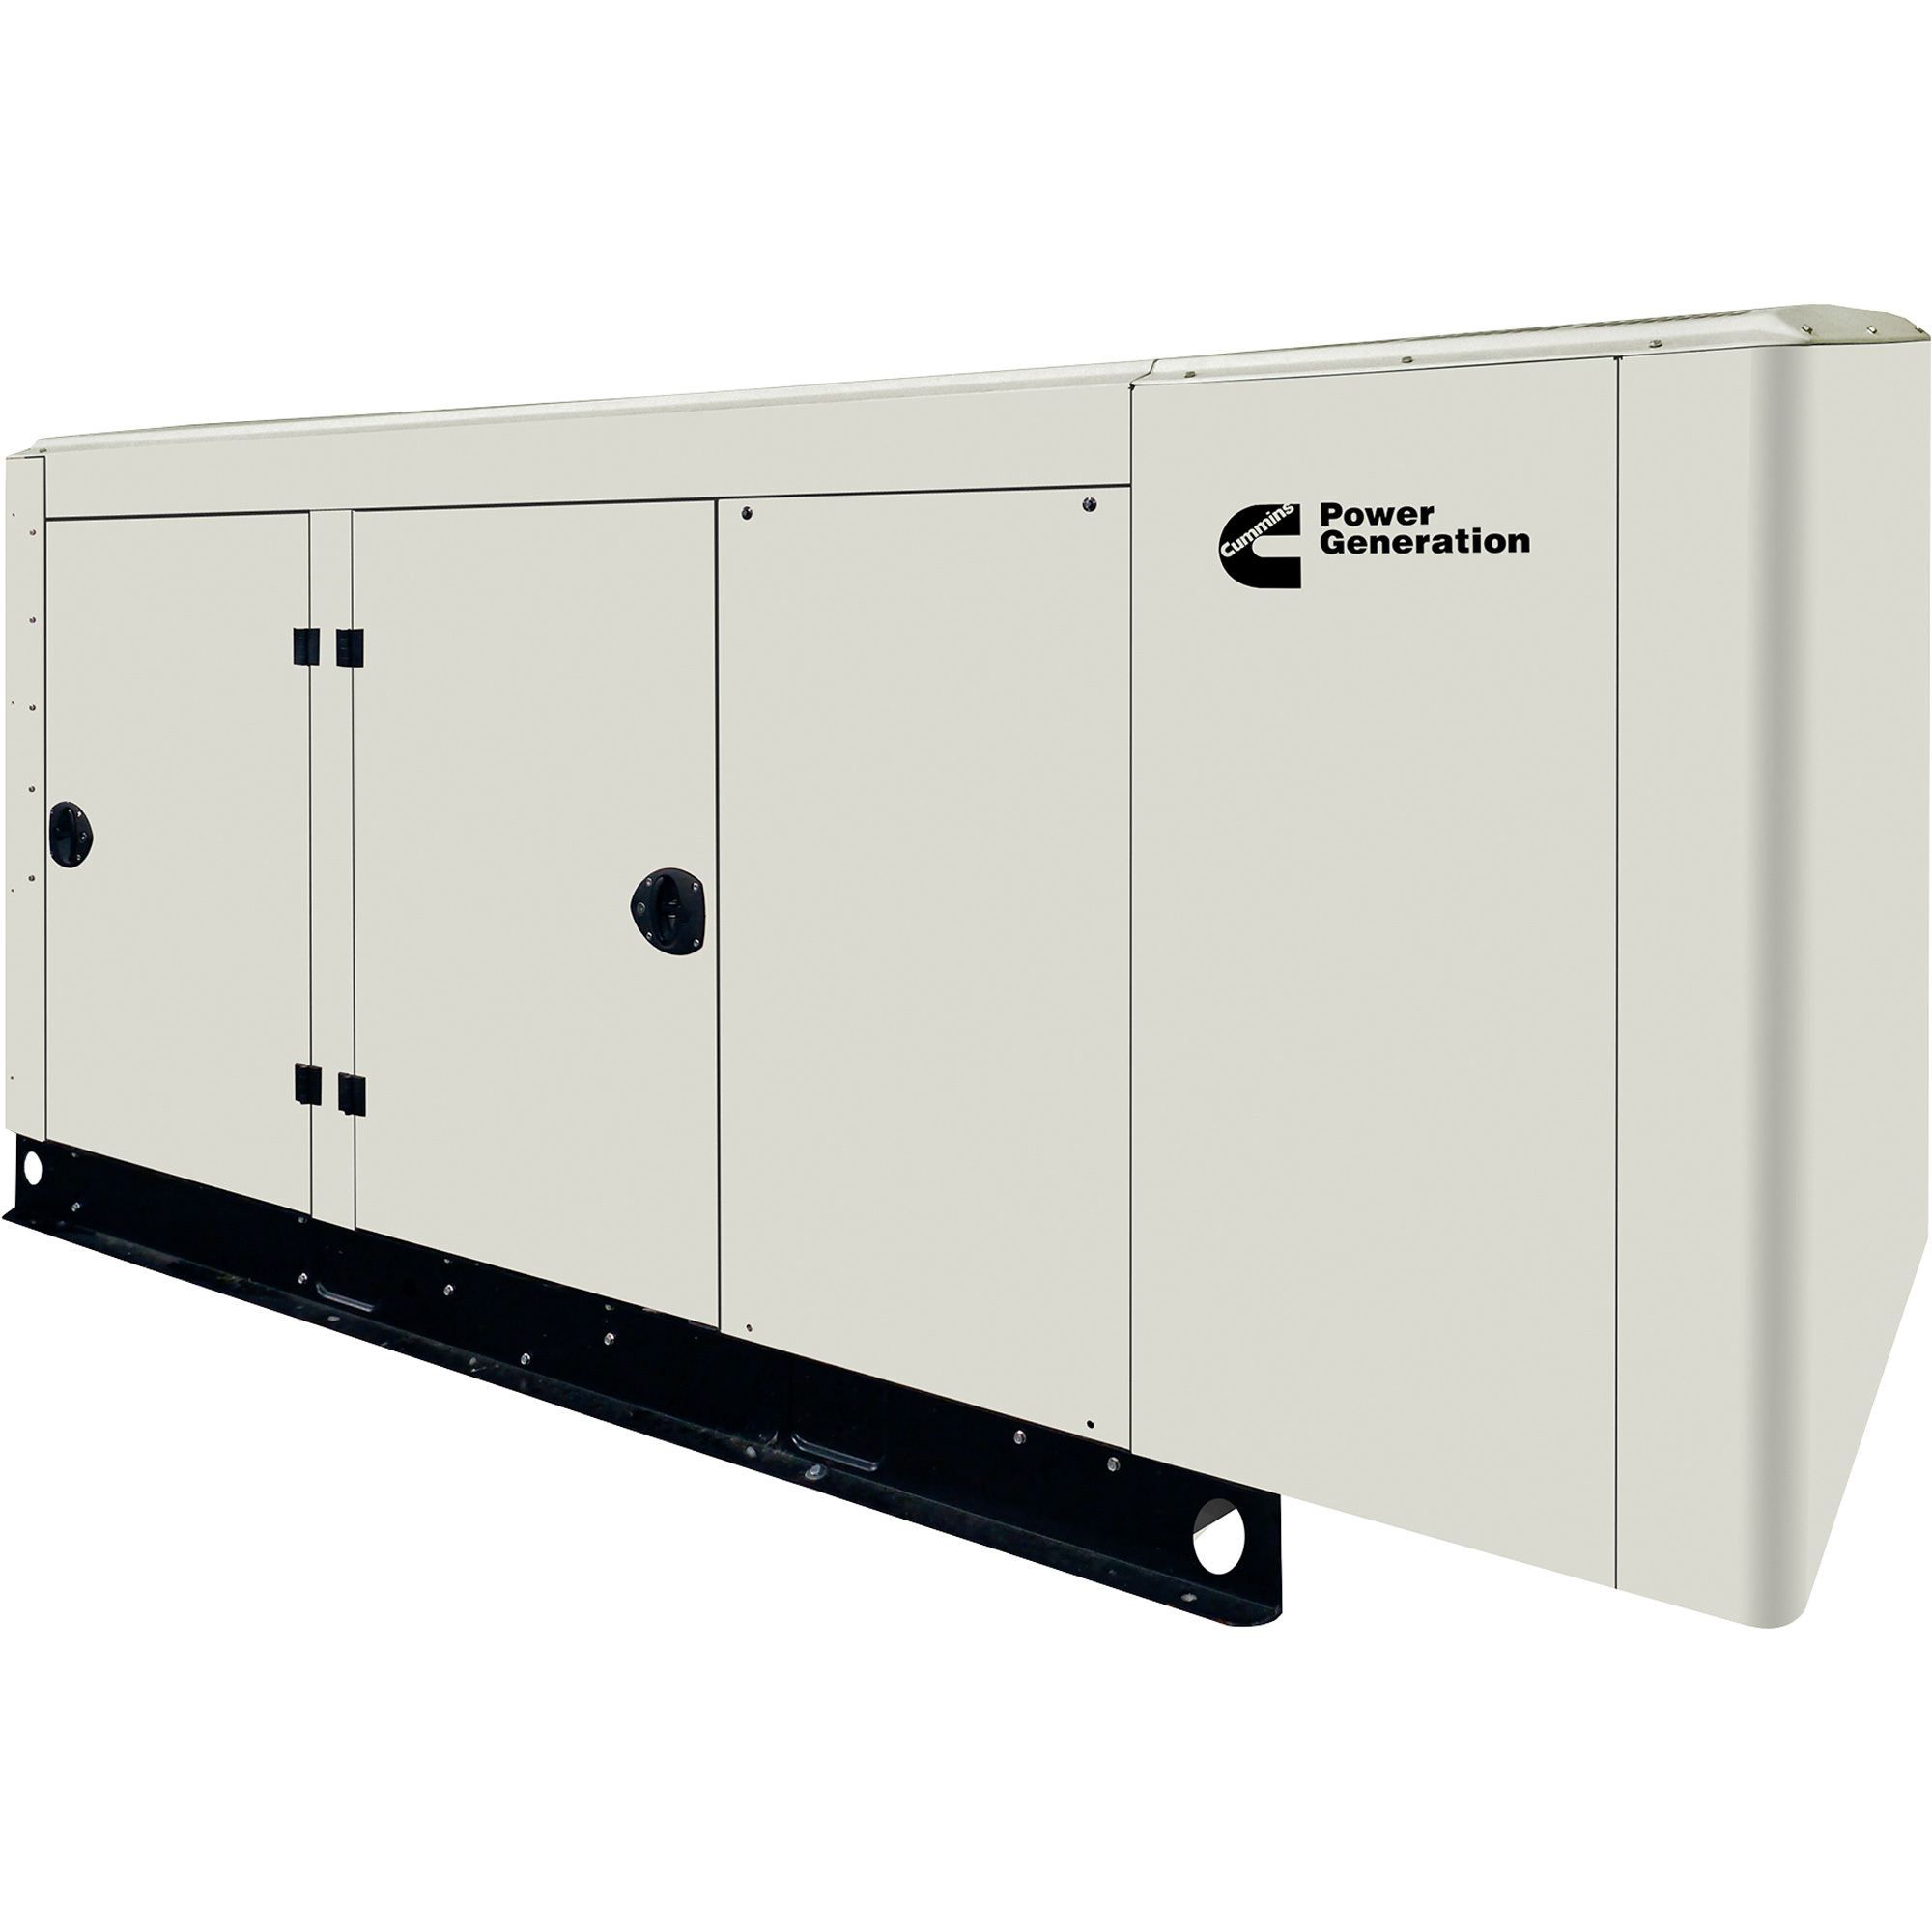 Cummins Commercial Standby Generator 60kW, LP/NG, 120/208 Volts, 3 Phase